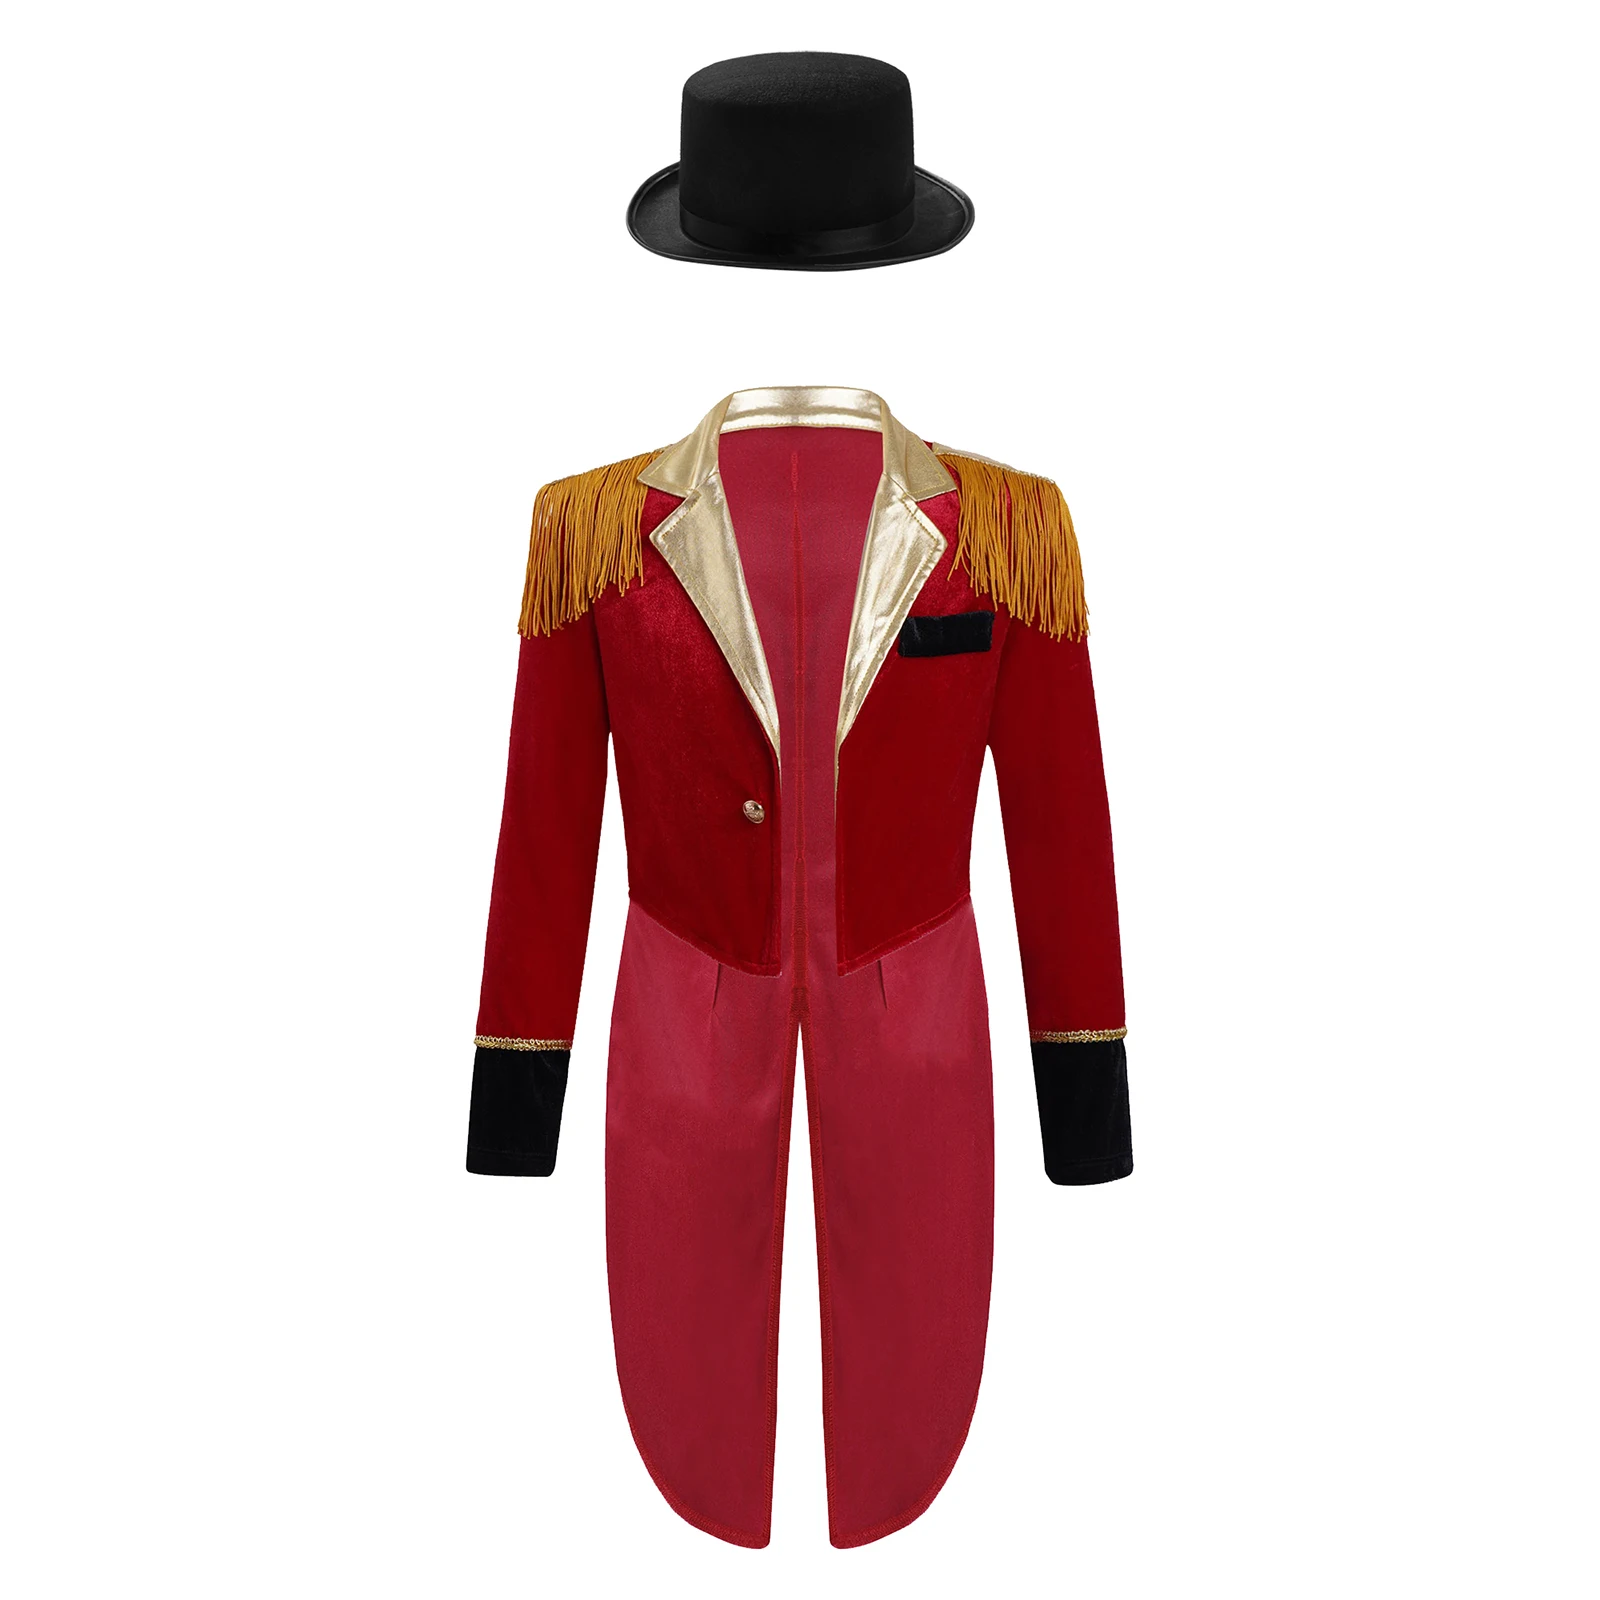 

Kids Boys Circus Ringmaster Costume Long Sleeve Lapel Tassels Coat with Hat Halloween Performance Party Cosplay Dress Up